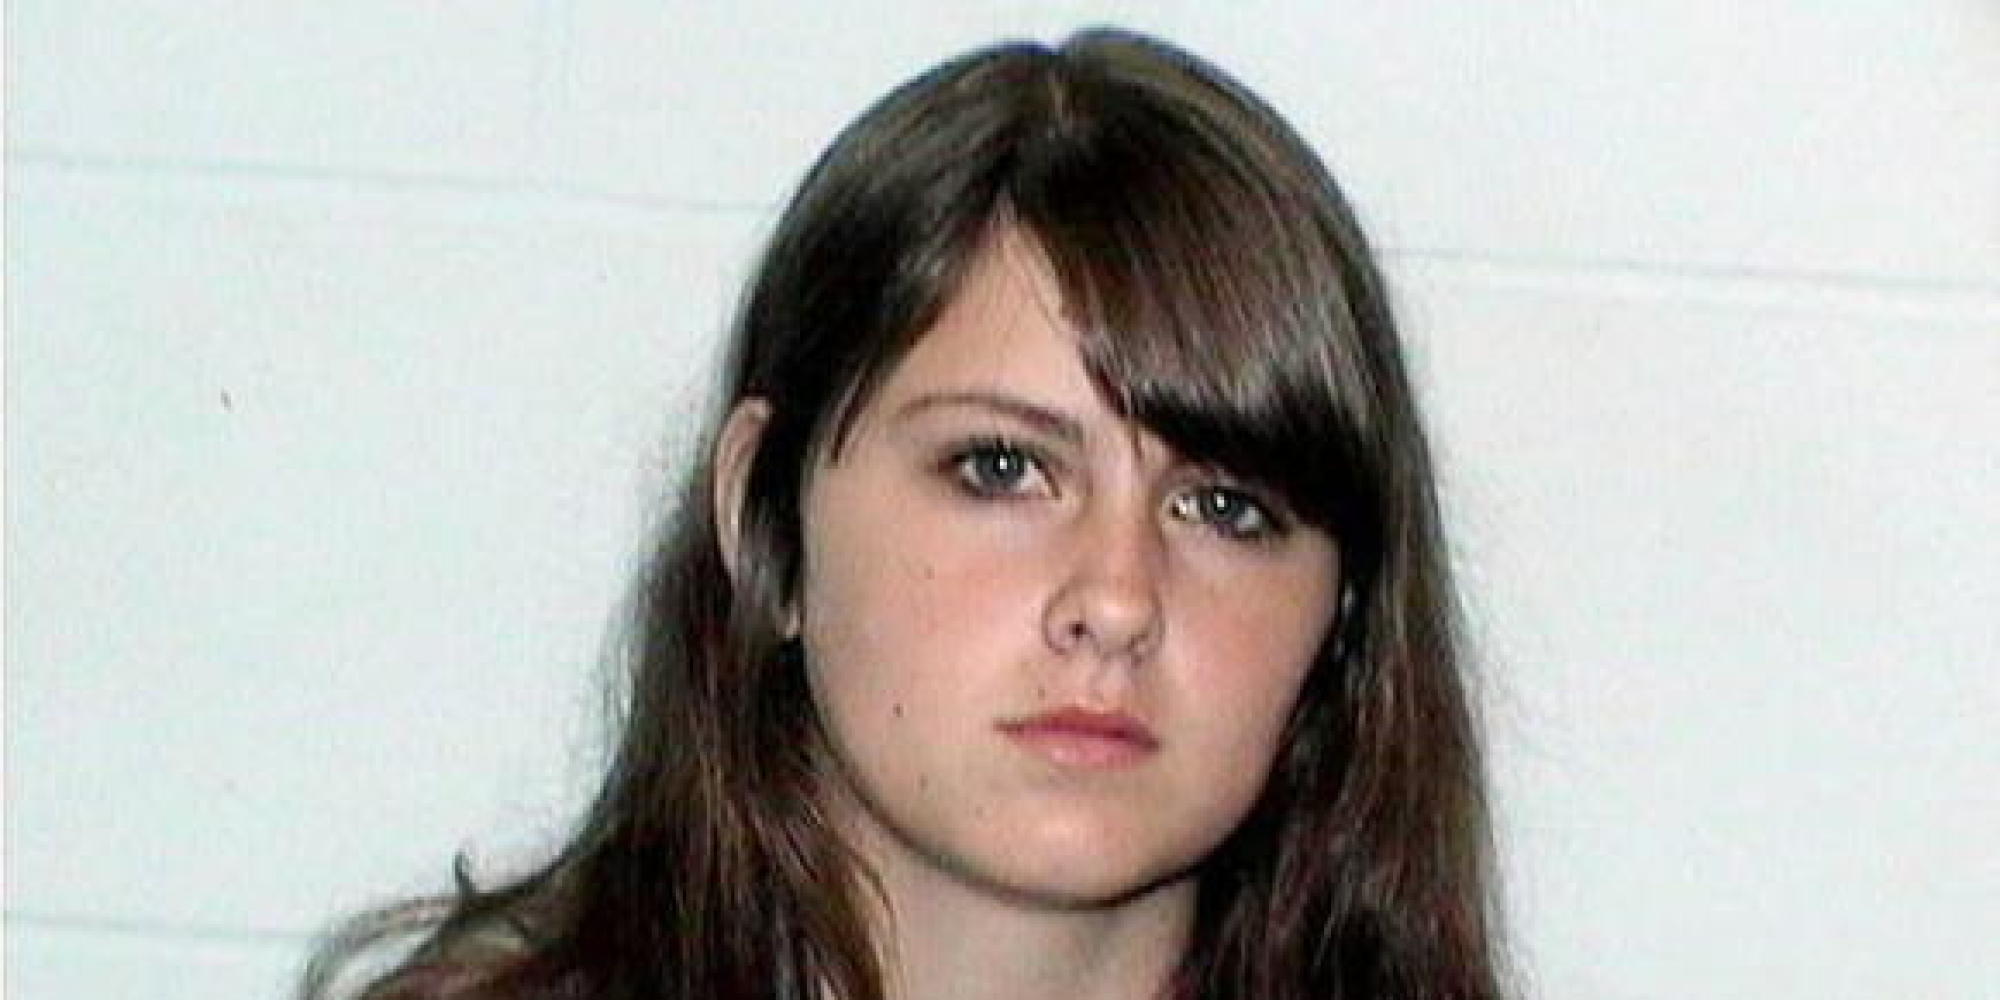 Loni Bouchard 22YearOld Babysitter Guilty Of Sex With Underaged Boys